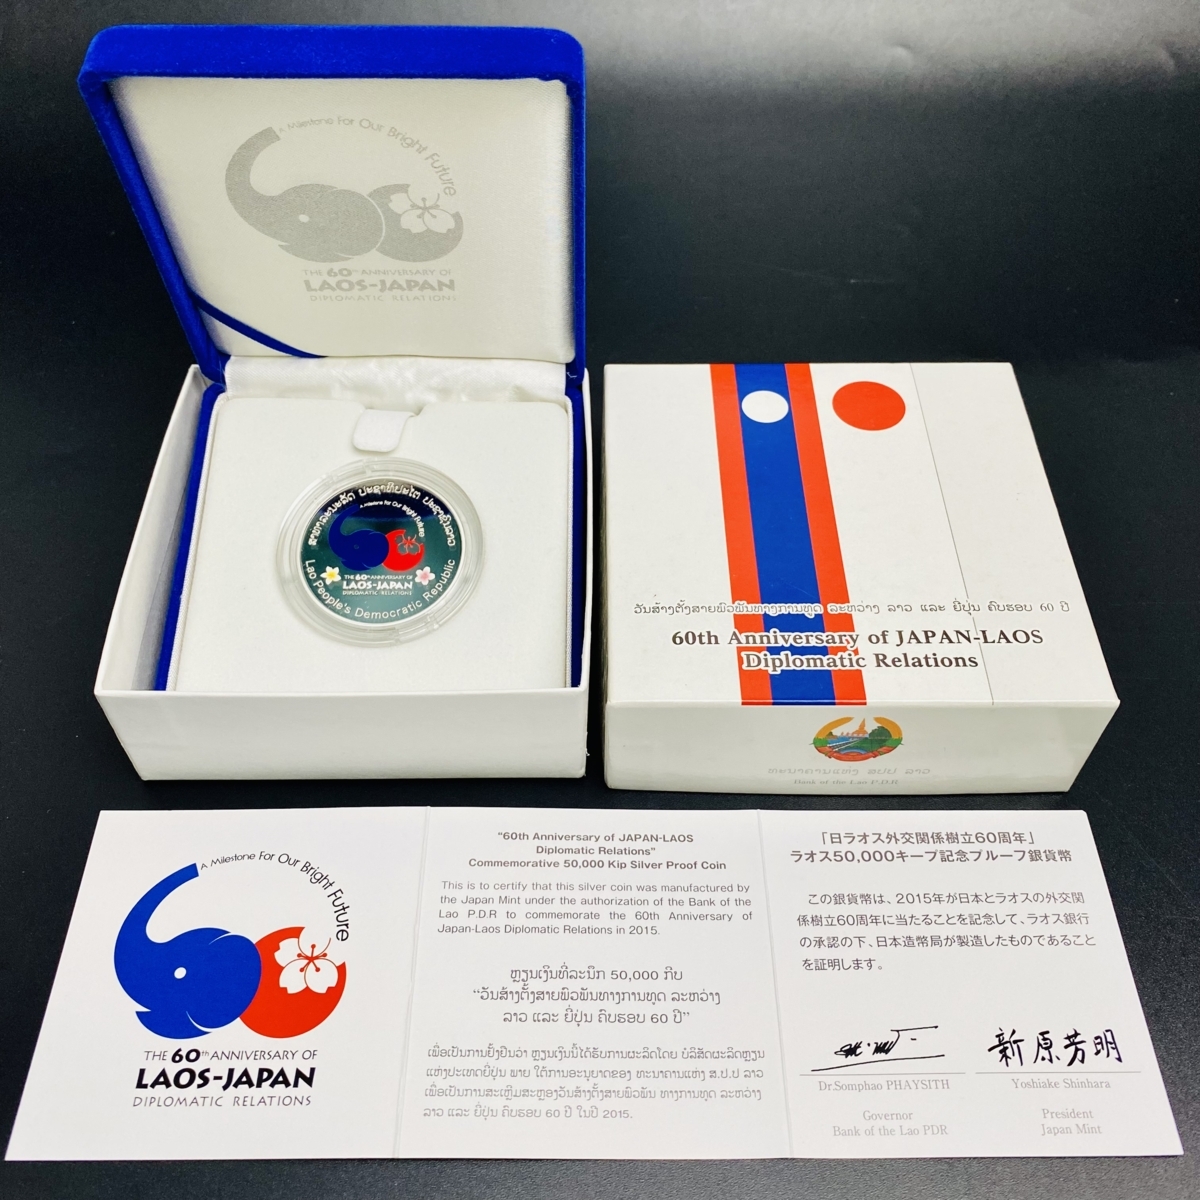  day la male out . relation ..60 anniversary la male 50000 keep memory silver coin . proof money set 2015 year Heisei era 27 year silver approximately 20g medal coin structure . department 